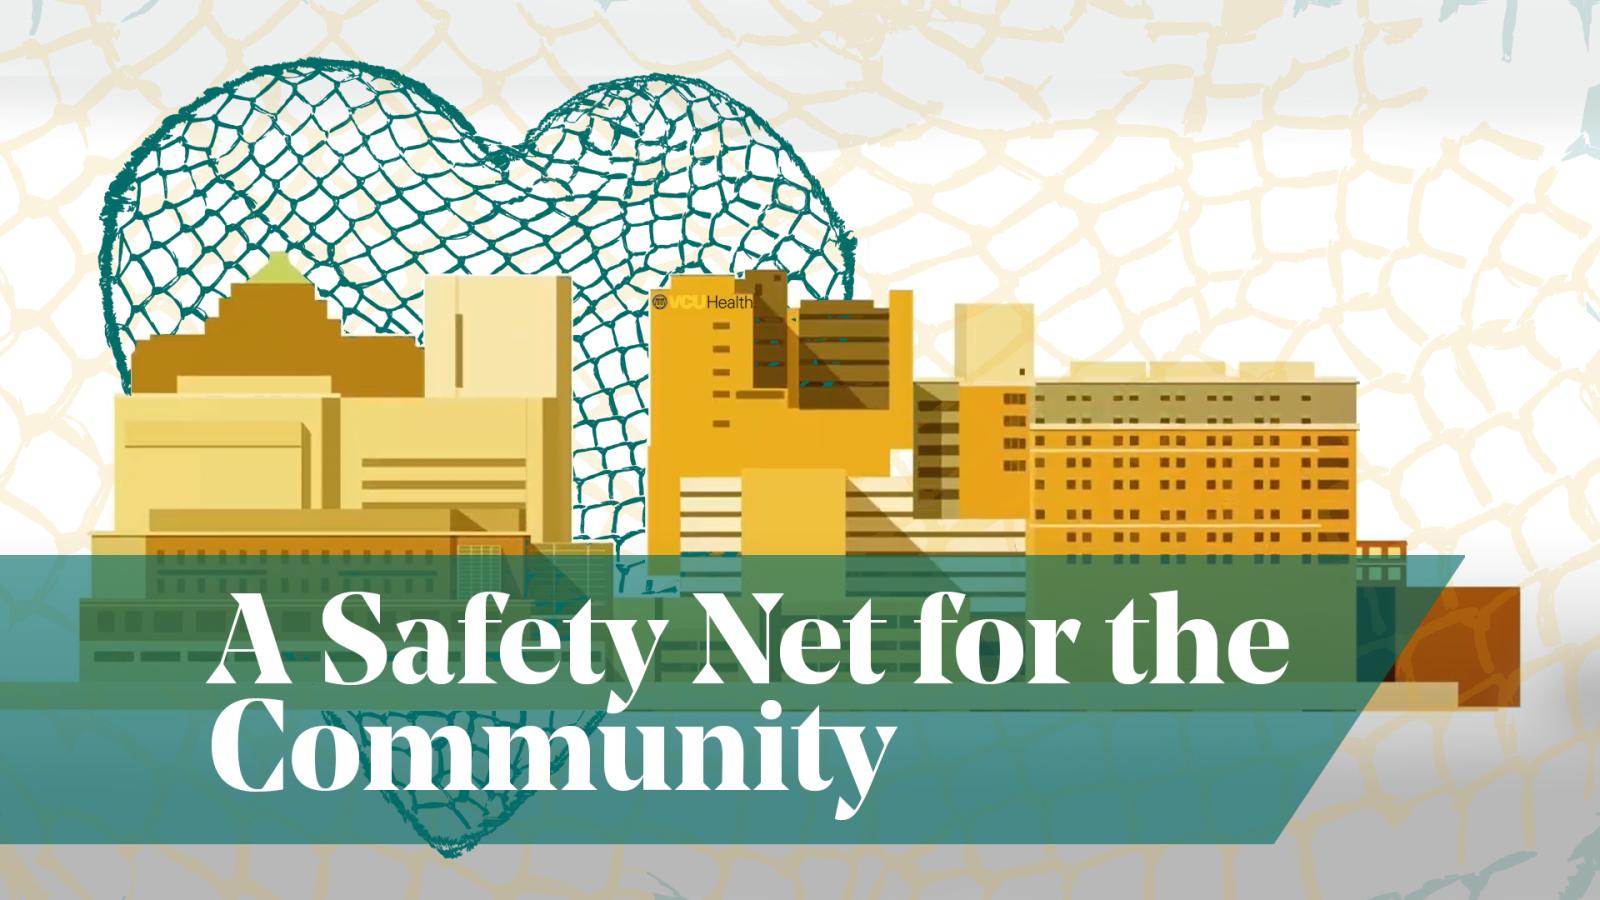 VCU Health System is a safety net for the community